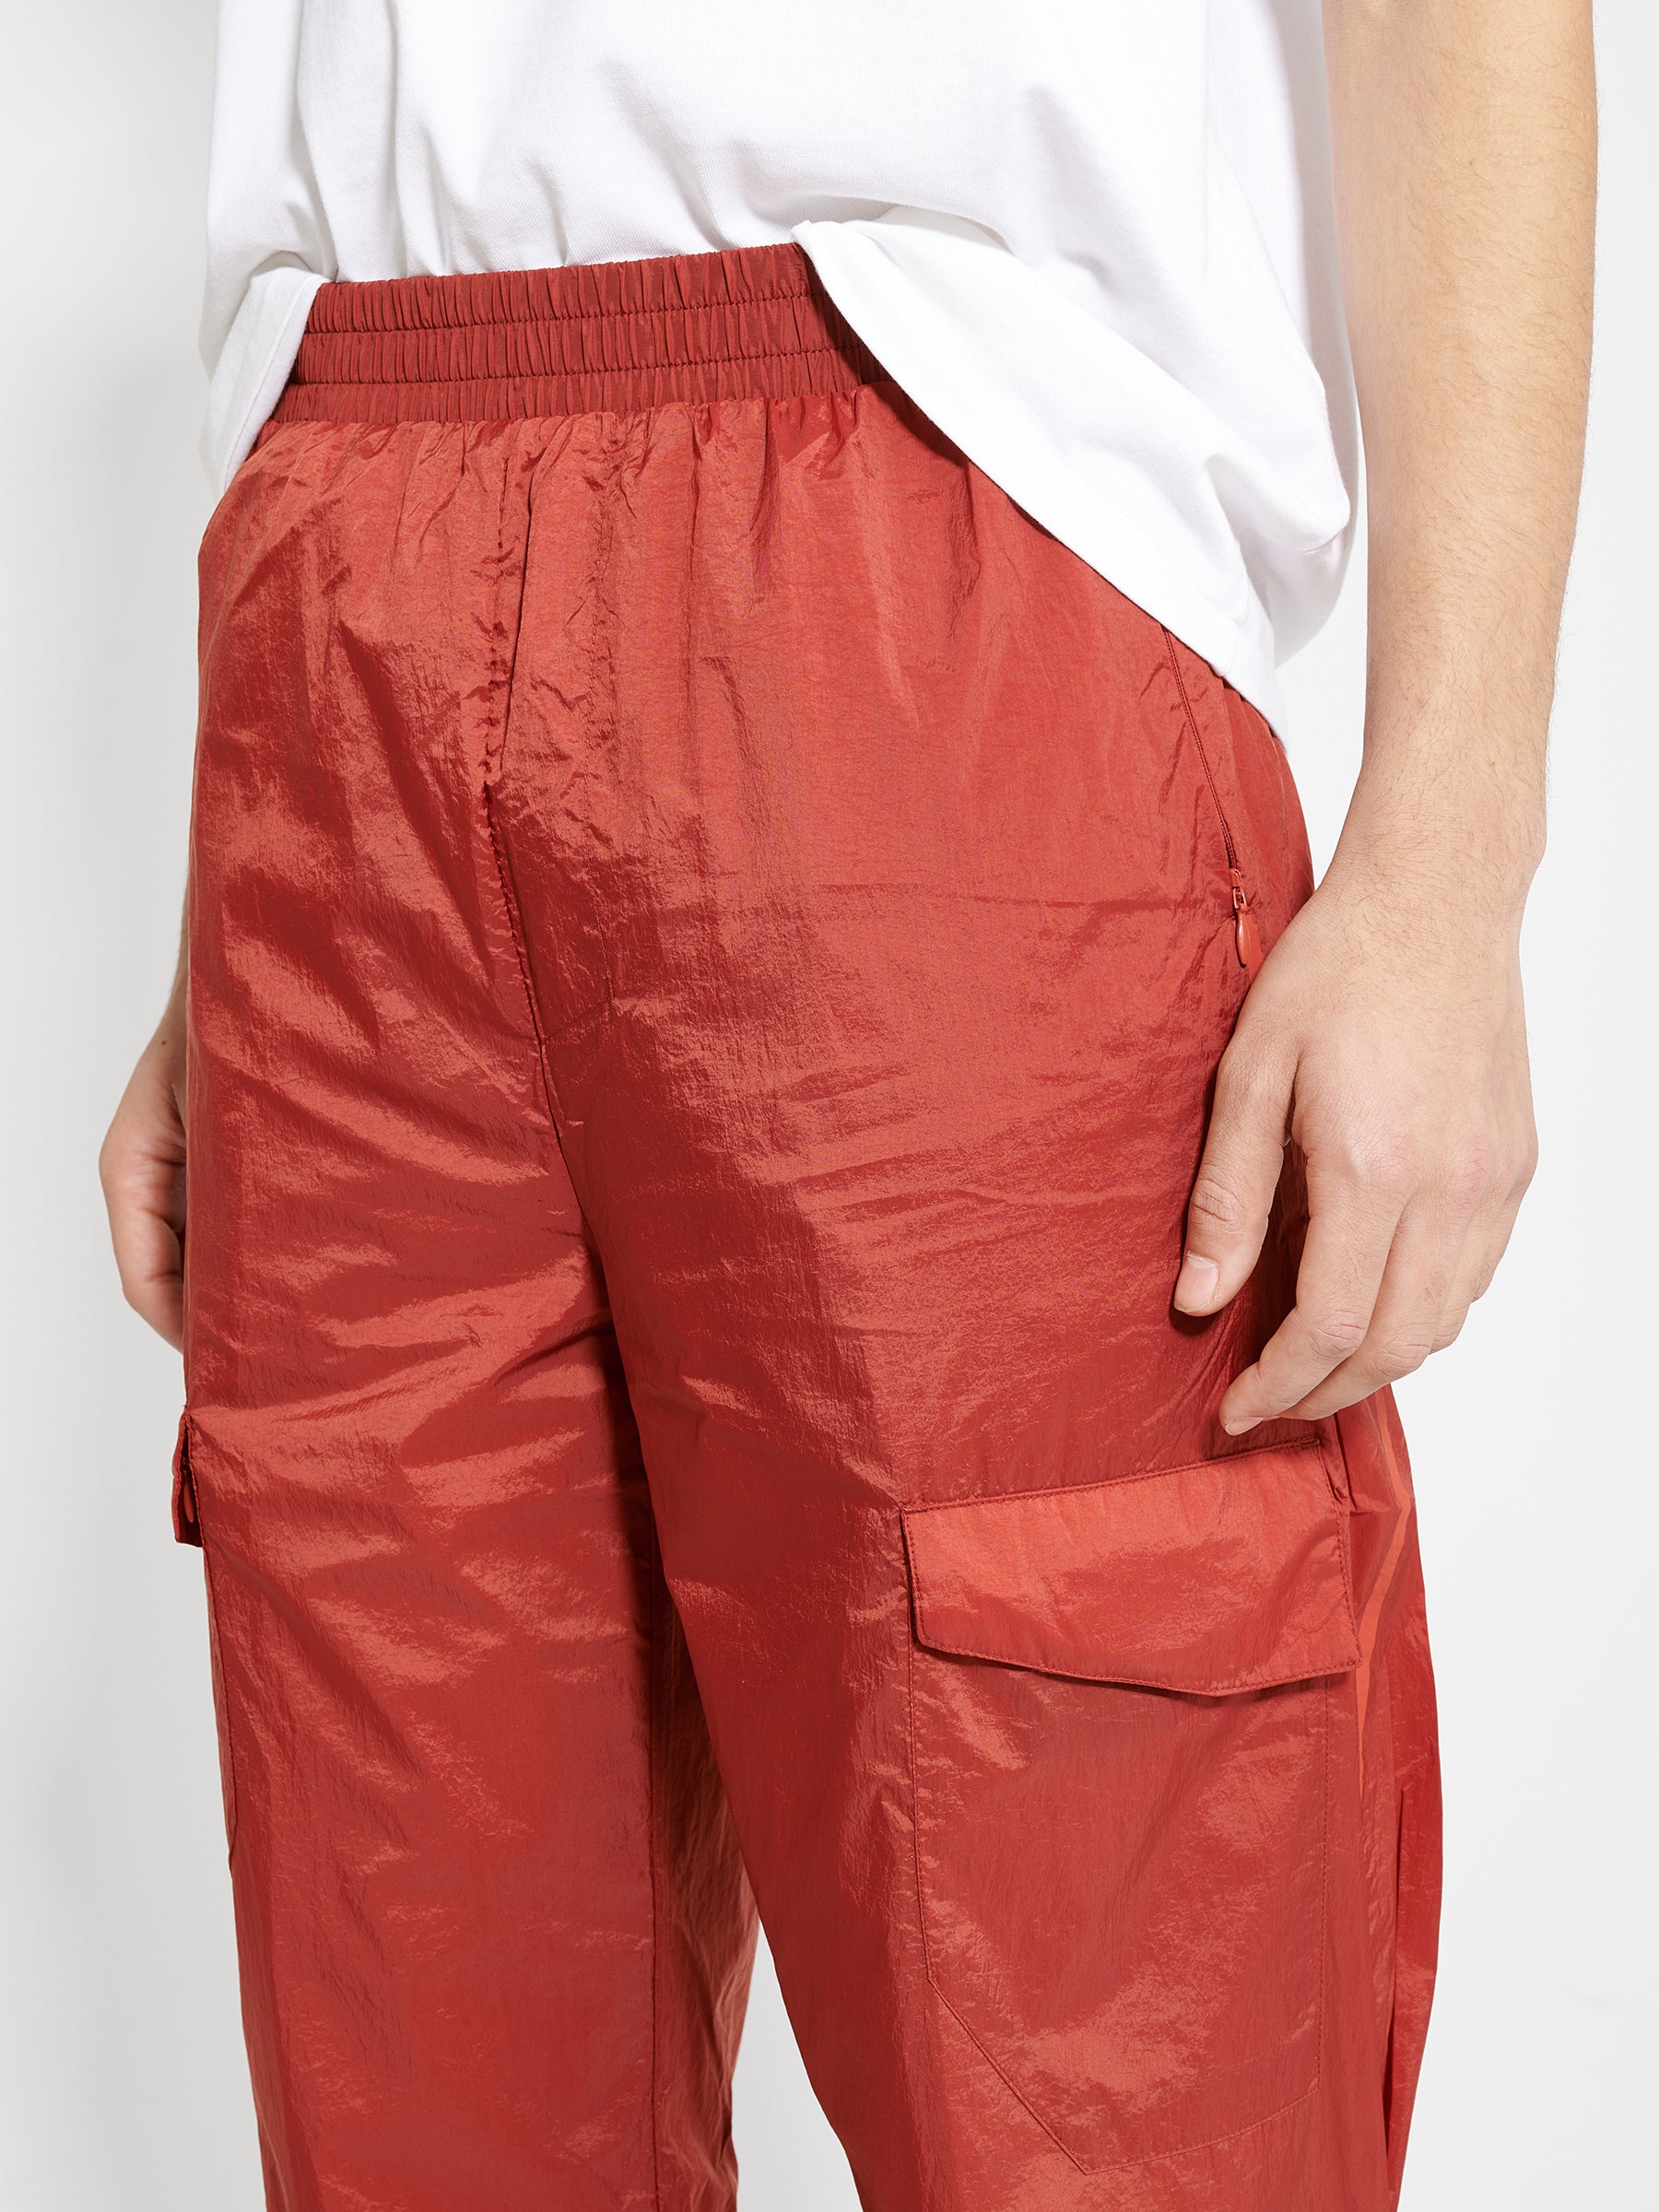 Converse x A-Cold-Wall* Reversible Gale Pant